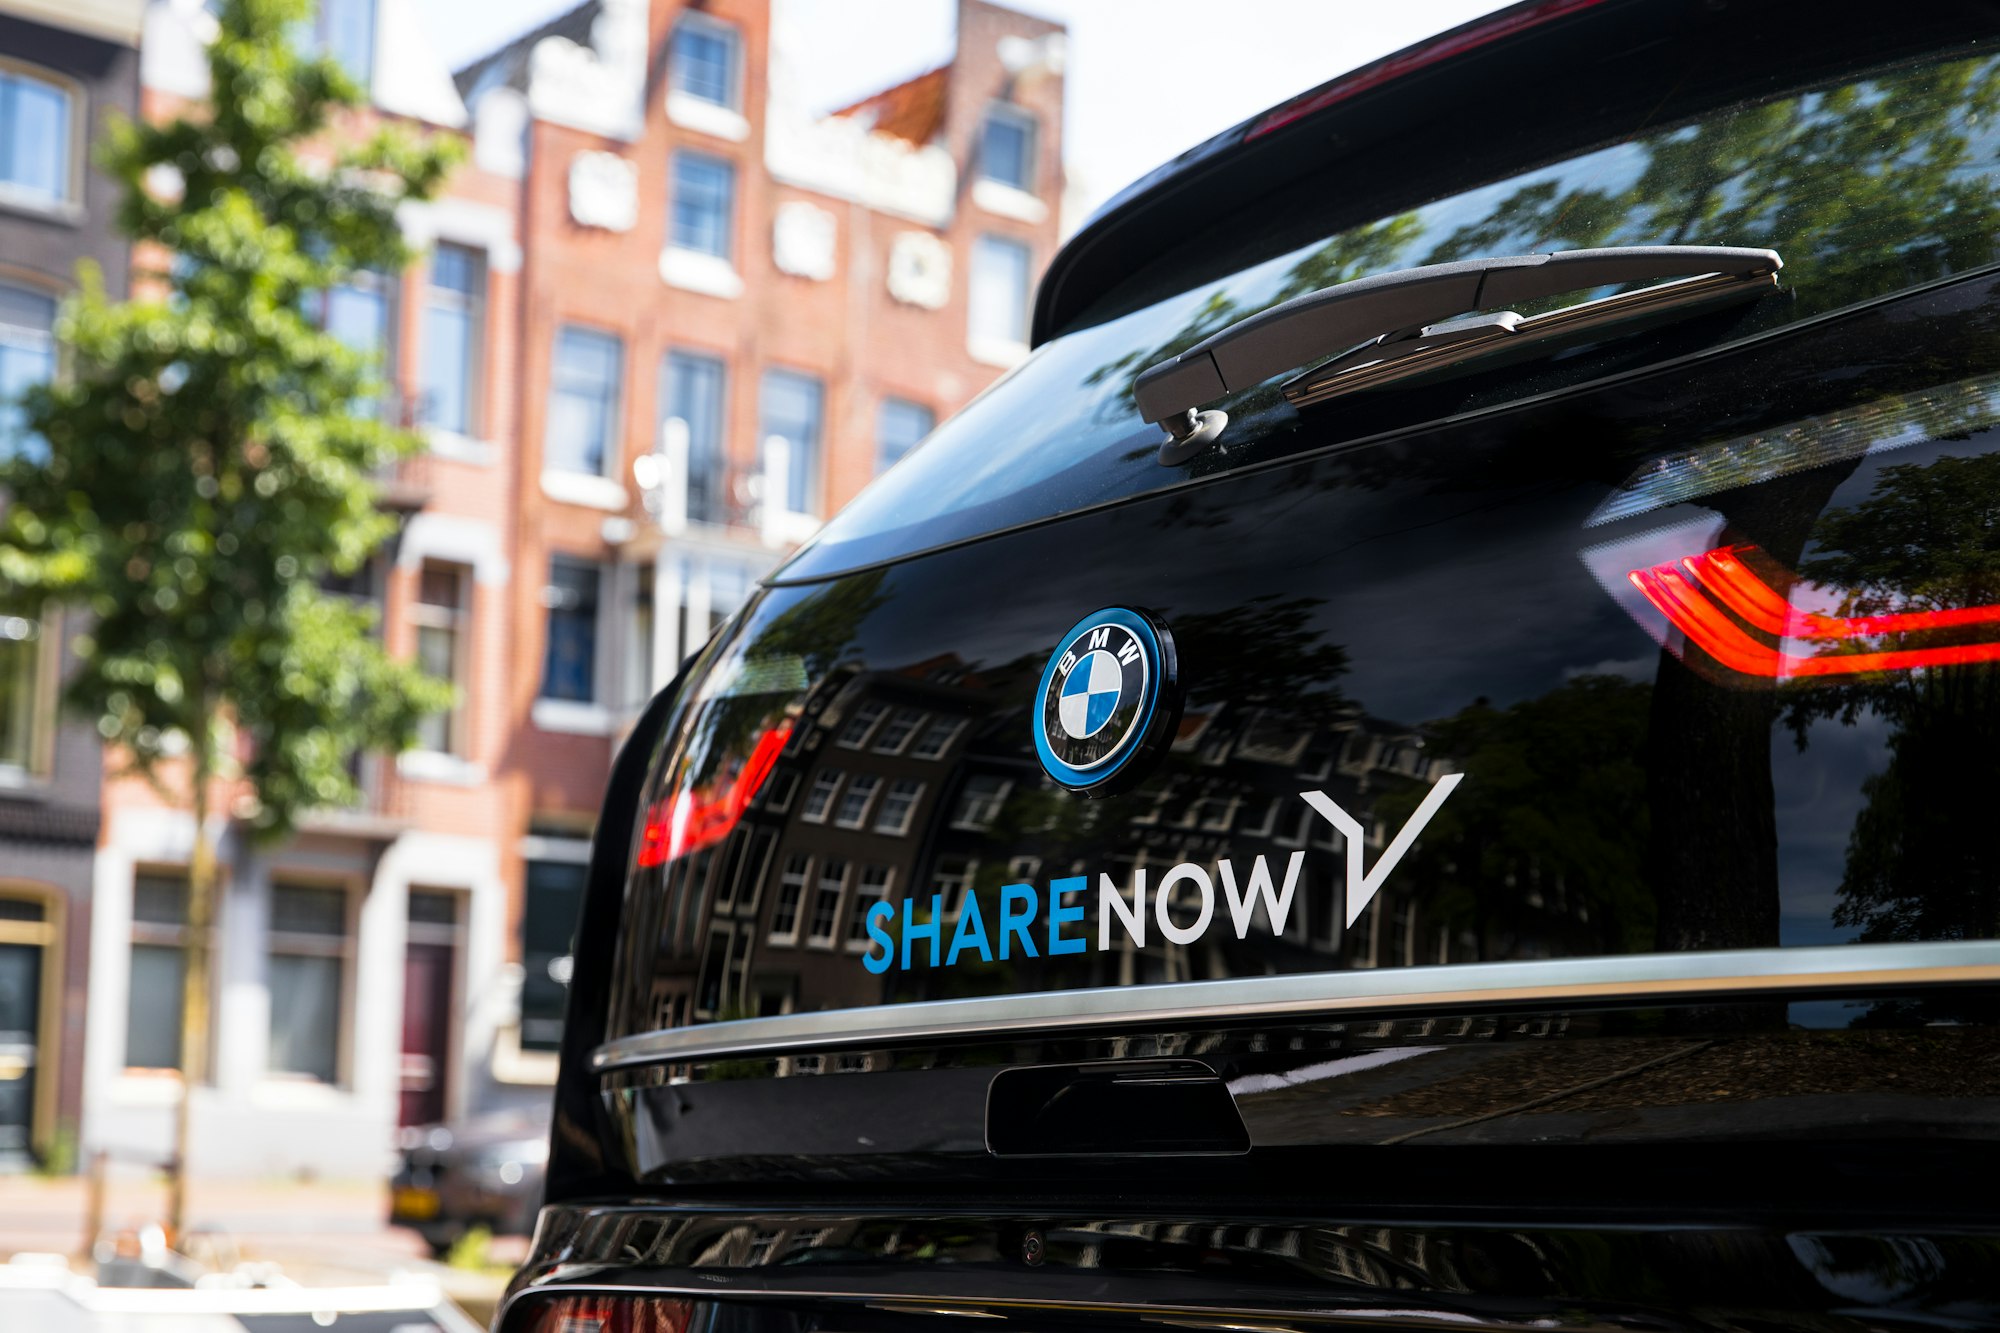 Supercharge the sharing economy with the Internet of Things